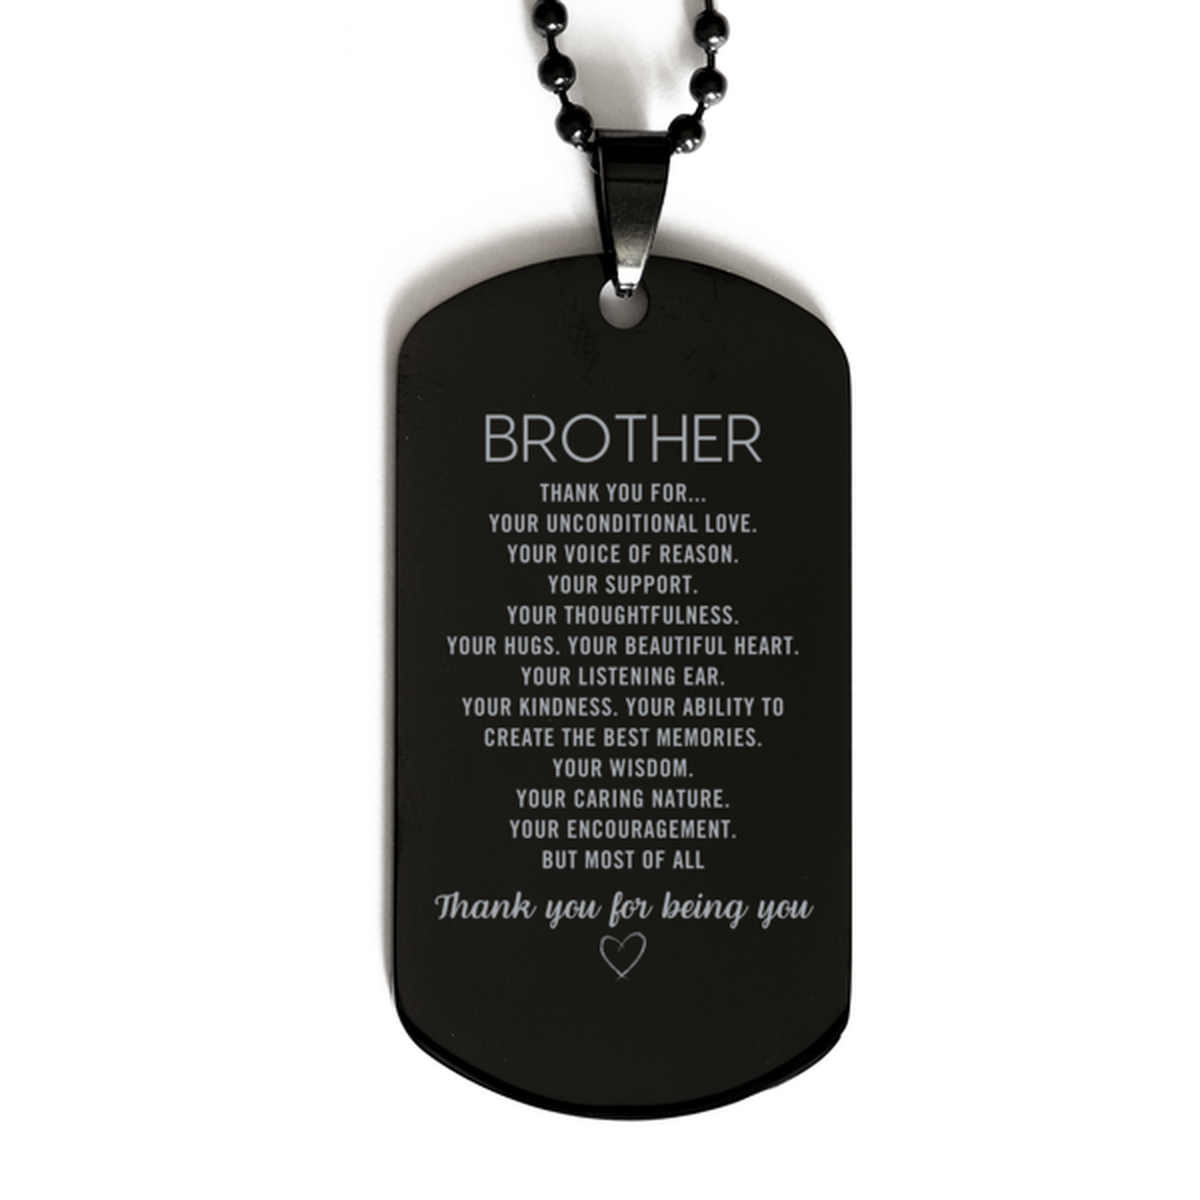 Brother Black Dog Tag Custom, Engraved Gifts For Brother Christmas Graduation Birthday Gifts for Men Women Brother Thank you for Your unconditional love